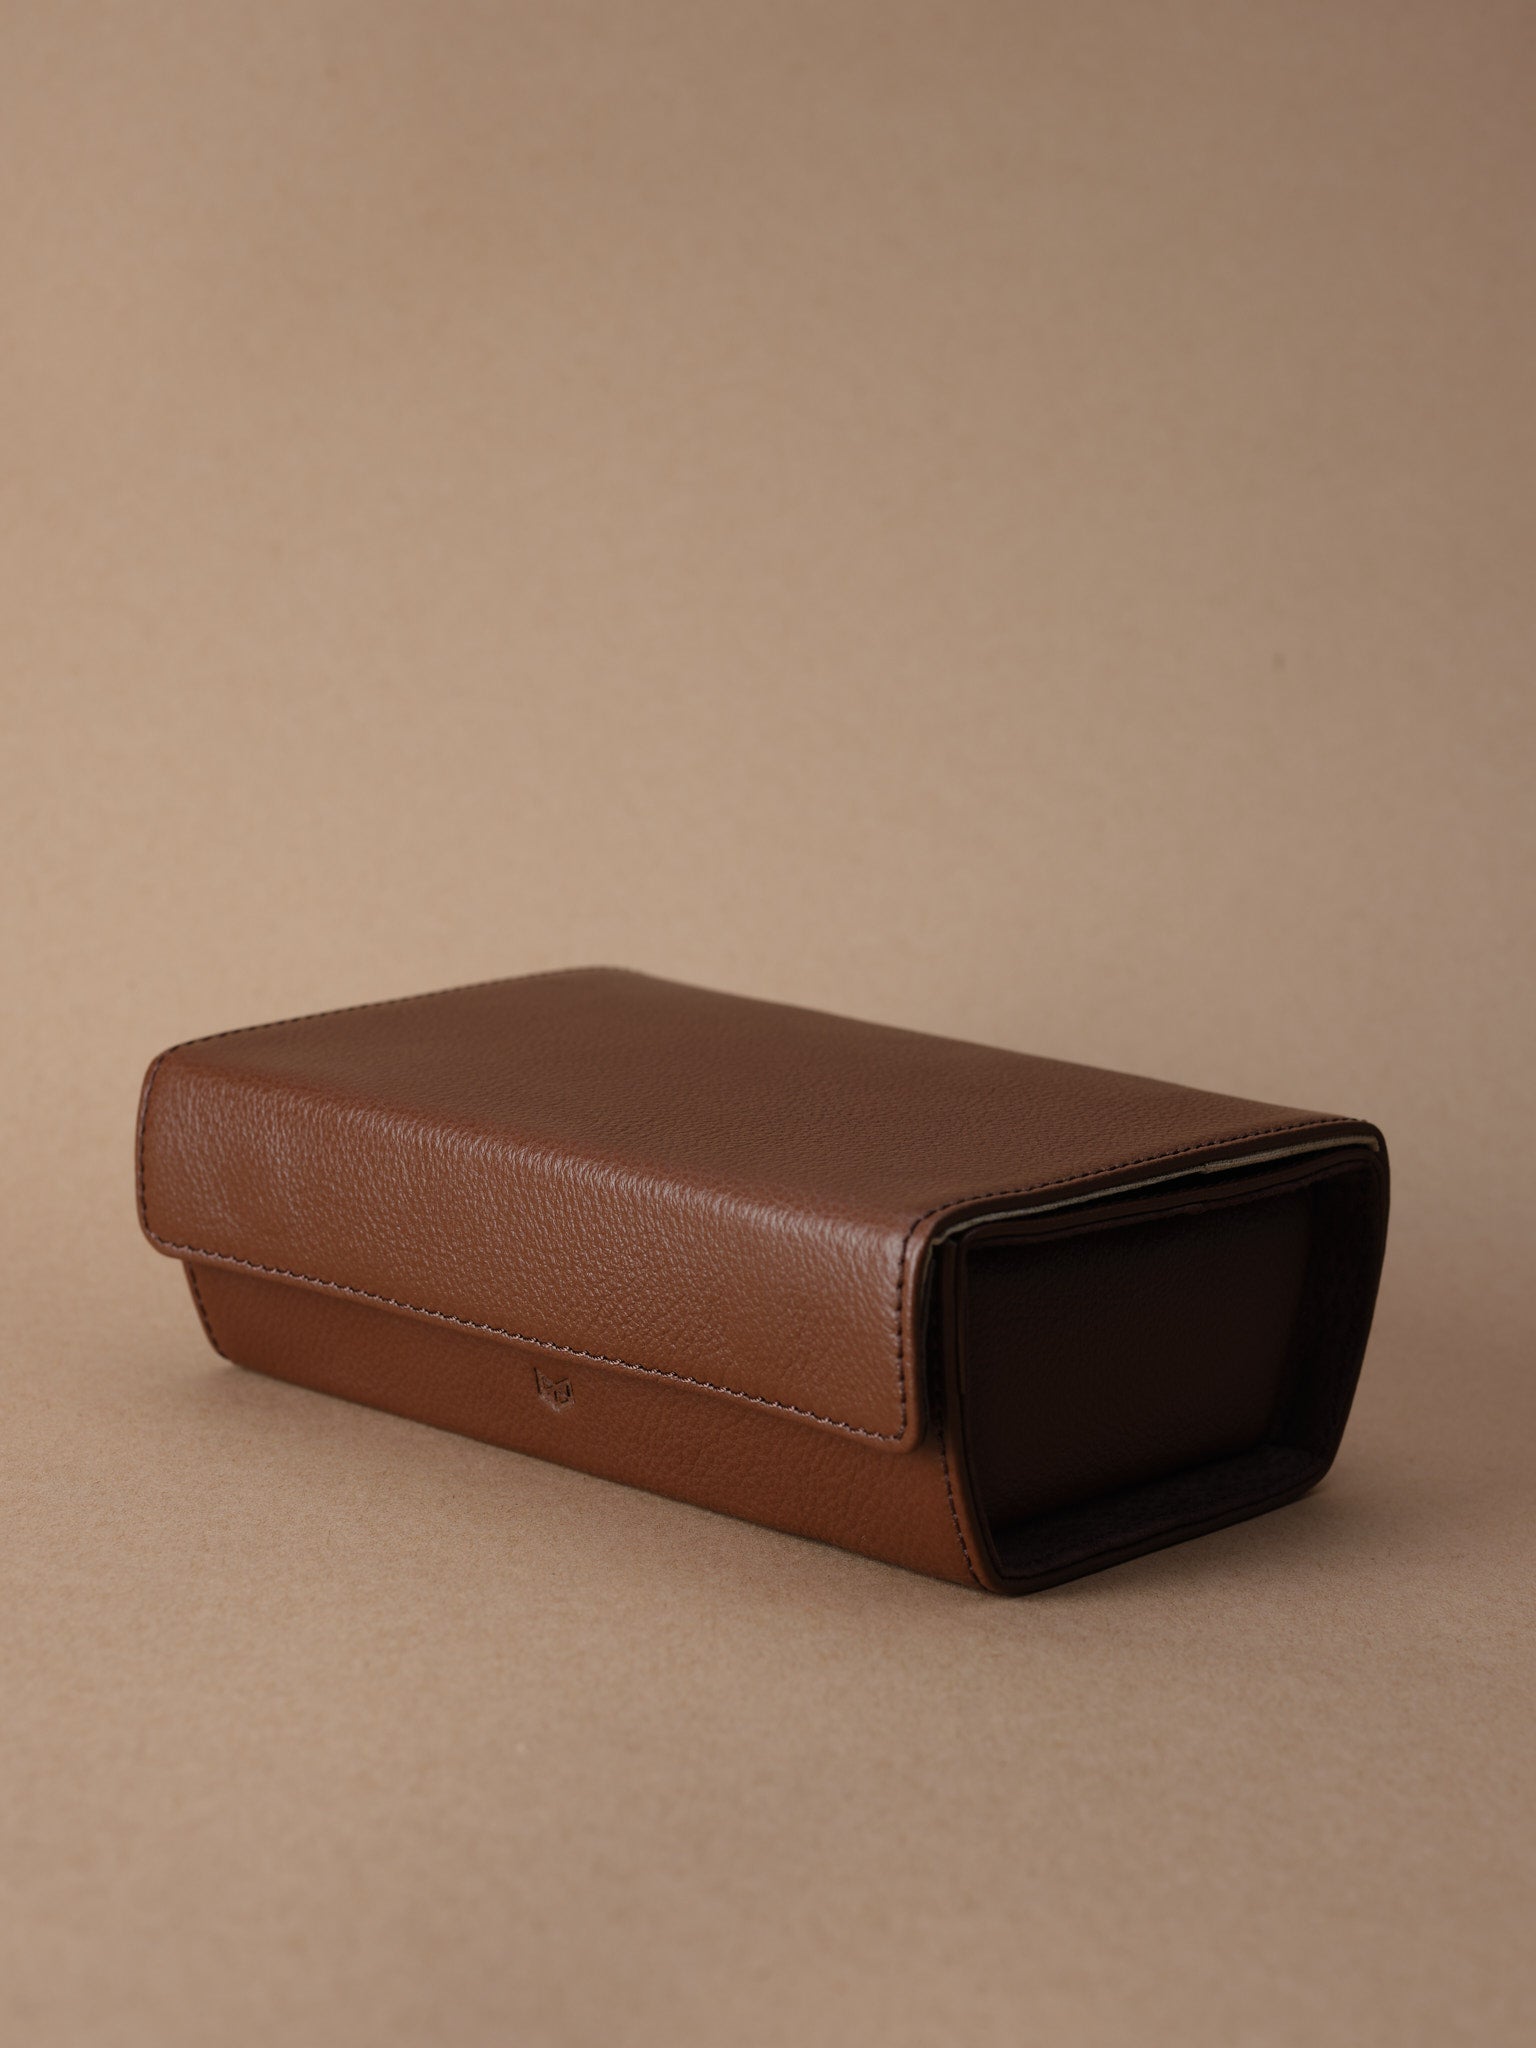 sunglass case brown by Capra Leather